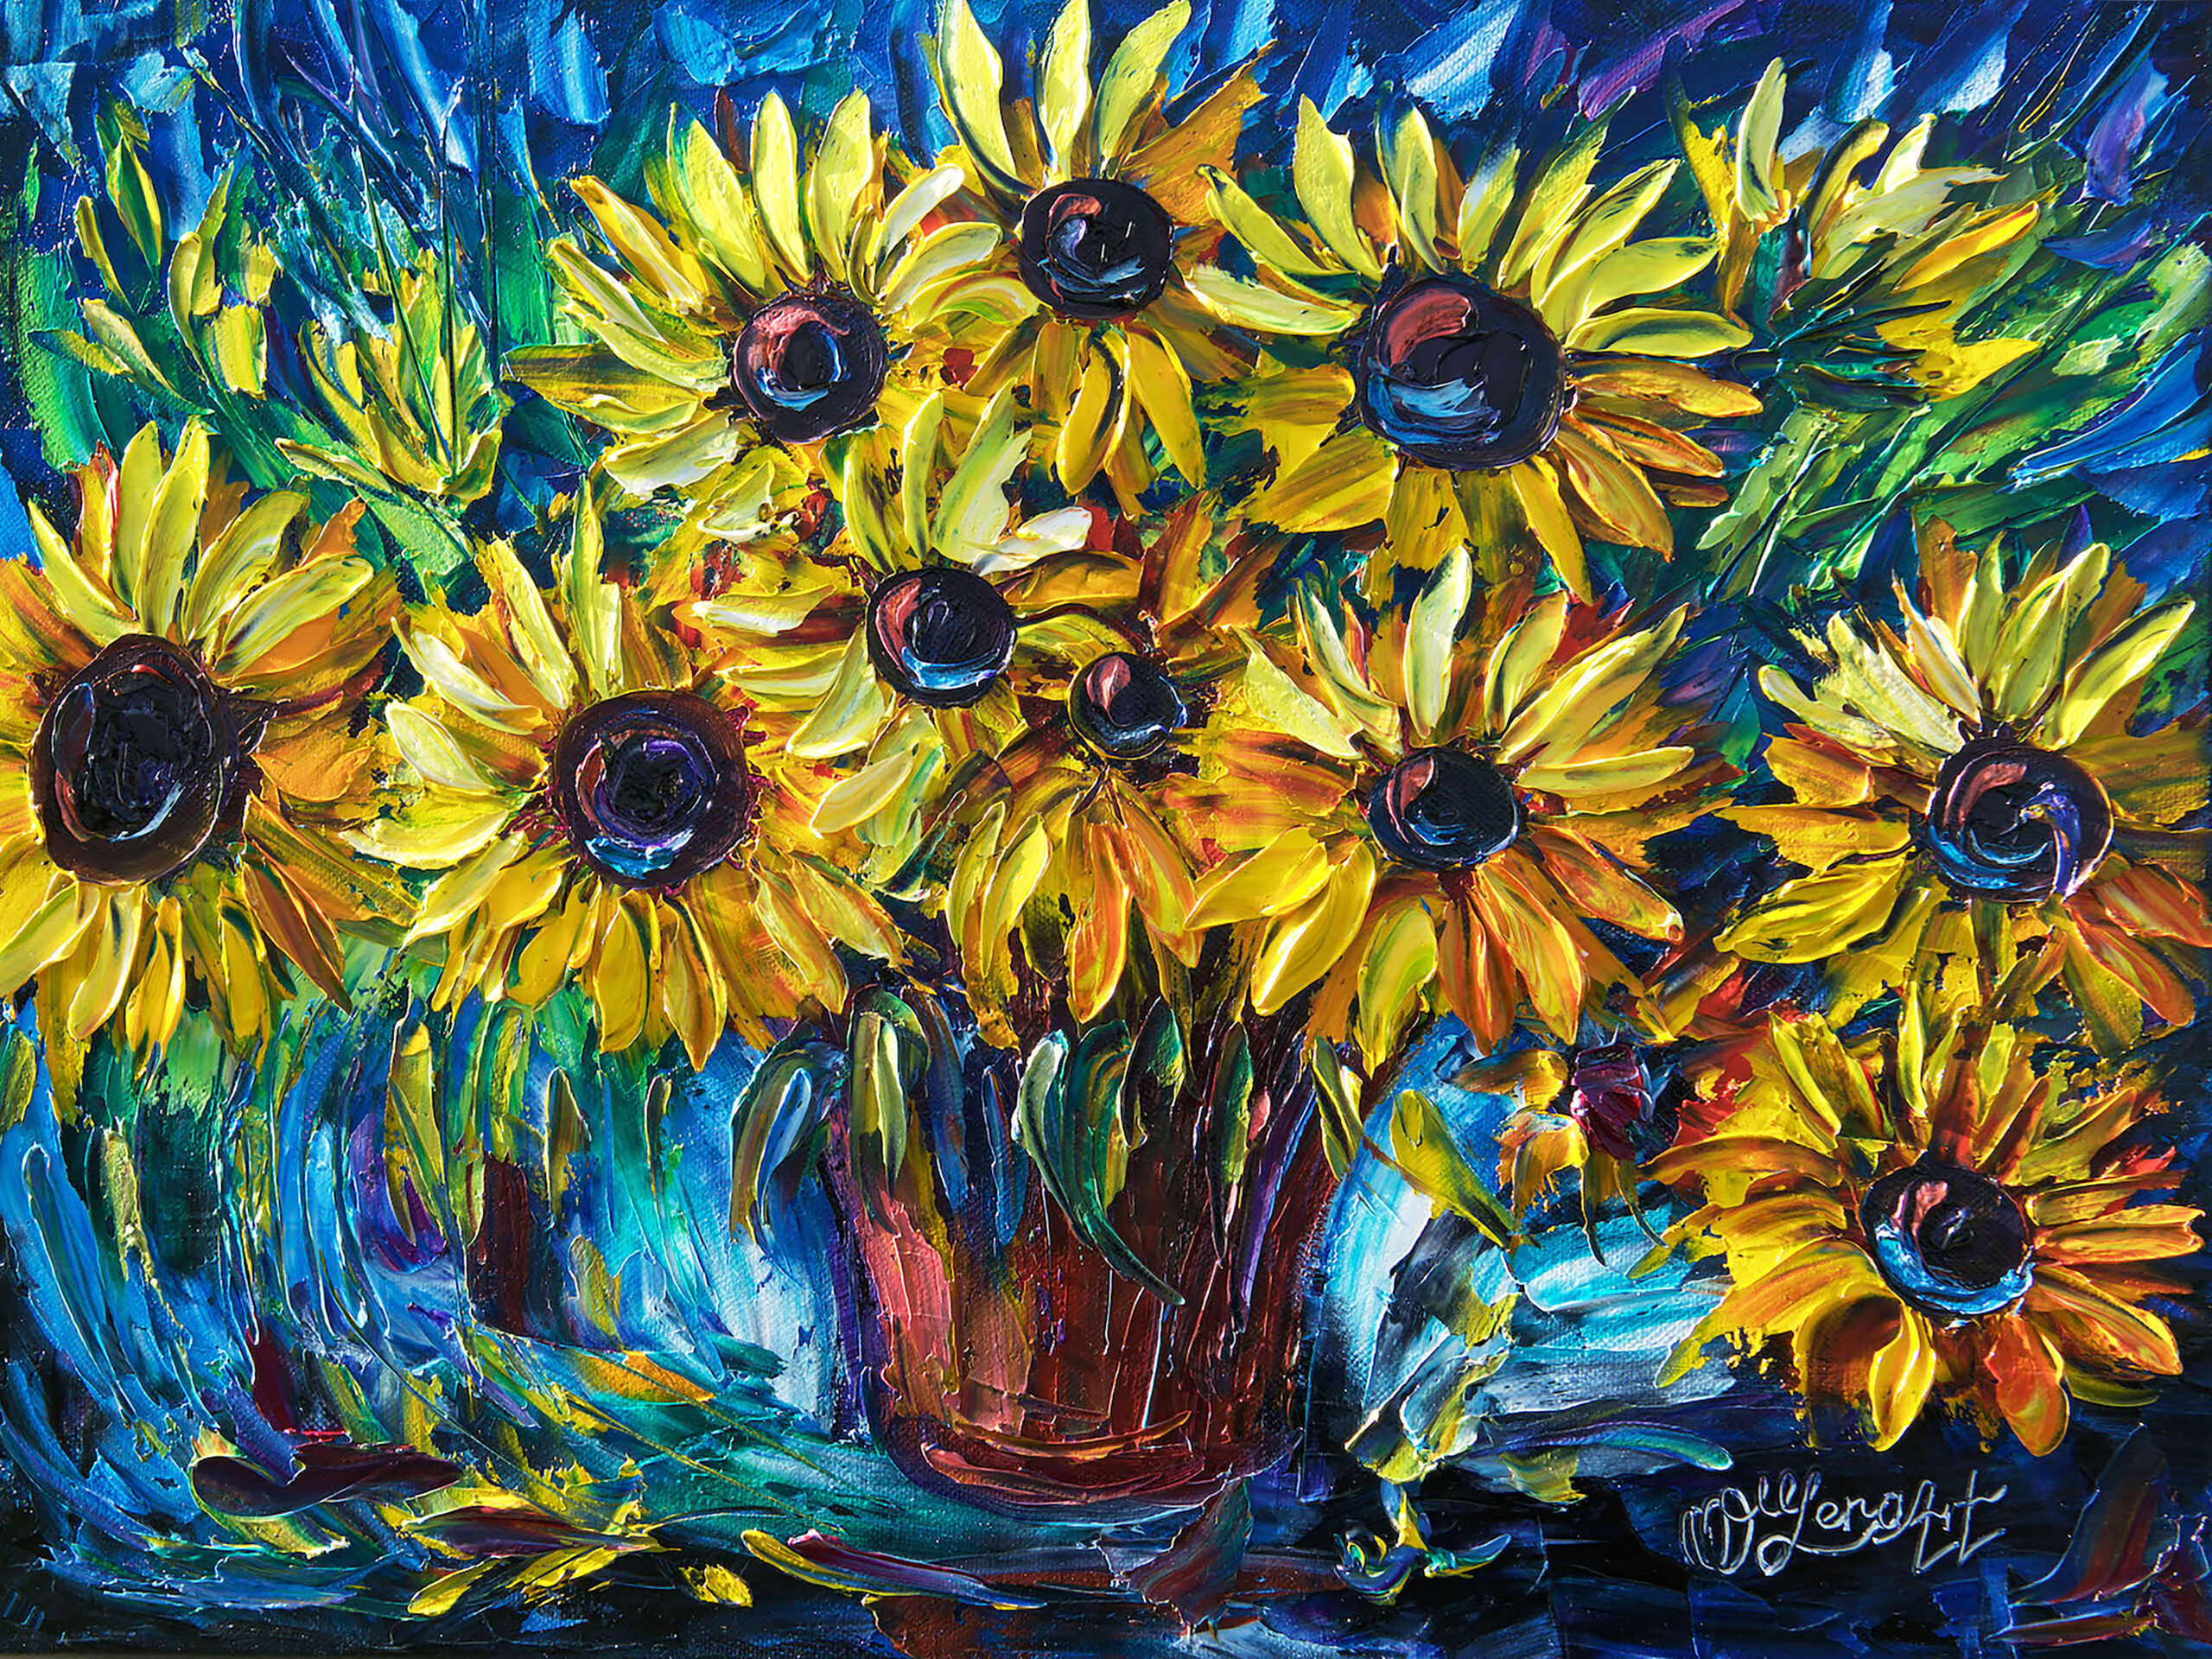 SUNFLOWERS — Palette knife by Lena Owens @OLena Art “The sunflower is mine, in a way.” 
― Vincent van Gogh
Another one and as you know – sunflowers – one of my favorite subject. I painting few similar Countryside Sunflowers, and each turned unique and different. 
by Lena Owens, Copyright OLena Art. 
“Art evokes the mystery without which the world would not exist”. – Rene Magritte
PRINT DETAILS 
- Giclee prints are high-resolution digital prints that meticulously capture the rich color and subtle texture of original art. 
- Only archival inks and acid-free materials are used to ensure your print lasts a lifetime without fading. 
- Made to order by pixels, redbubble, society6 or olenaart.me
RISK-FREE RETURNS 
- If you don’t love it, return it in 30 days for a full refund.
PRINT OPTIONS 
- Available in multiple sizes and materials to perfectly suit your space. 
- Optional custom framing services save you time and hassle. 
- Framed &amp; mounted prints arrive “ready-to-hang” with pre-attached hanging wire, hooks and nails.
ORDERS &amp; SHIPPING 
- Ready to ship in 3-4 business days. 
- Shipped worldwide. 
One of the things that makes me inspired is an example of many artists I follow and trying to learn, who are using traditional palette knife technique: Leonid Afremov, Lyudmila Agrich, Maya Eventov, Mona Edulesco, Jessilyn Park! All of them are great example, how to use bright, bold application of thick paint layers! Way to go!
sunflower, pink, red, nature, floral, spring, country, flowers, summer, garden, fragile, bright, original, artwork, palette, knife, oil, painting, painting, on, canvas, yellow, color, bright, colors, thick, impasto, thick, paint, layers, lena, owens, art, olena, art, painting, knife painting, oil painging, palette knife, original artowrk, thick paint layers, lena owens, olena art, sunflowers, original painting, floral, colourful, home decor, colorado artist, contemporary, modern art, fine art, sunflower pink red nature floral spr